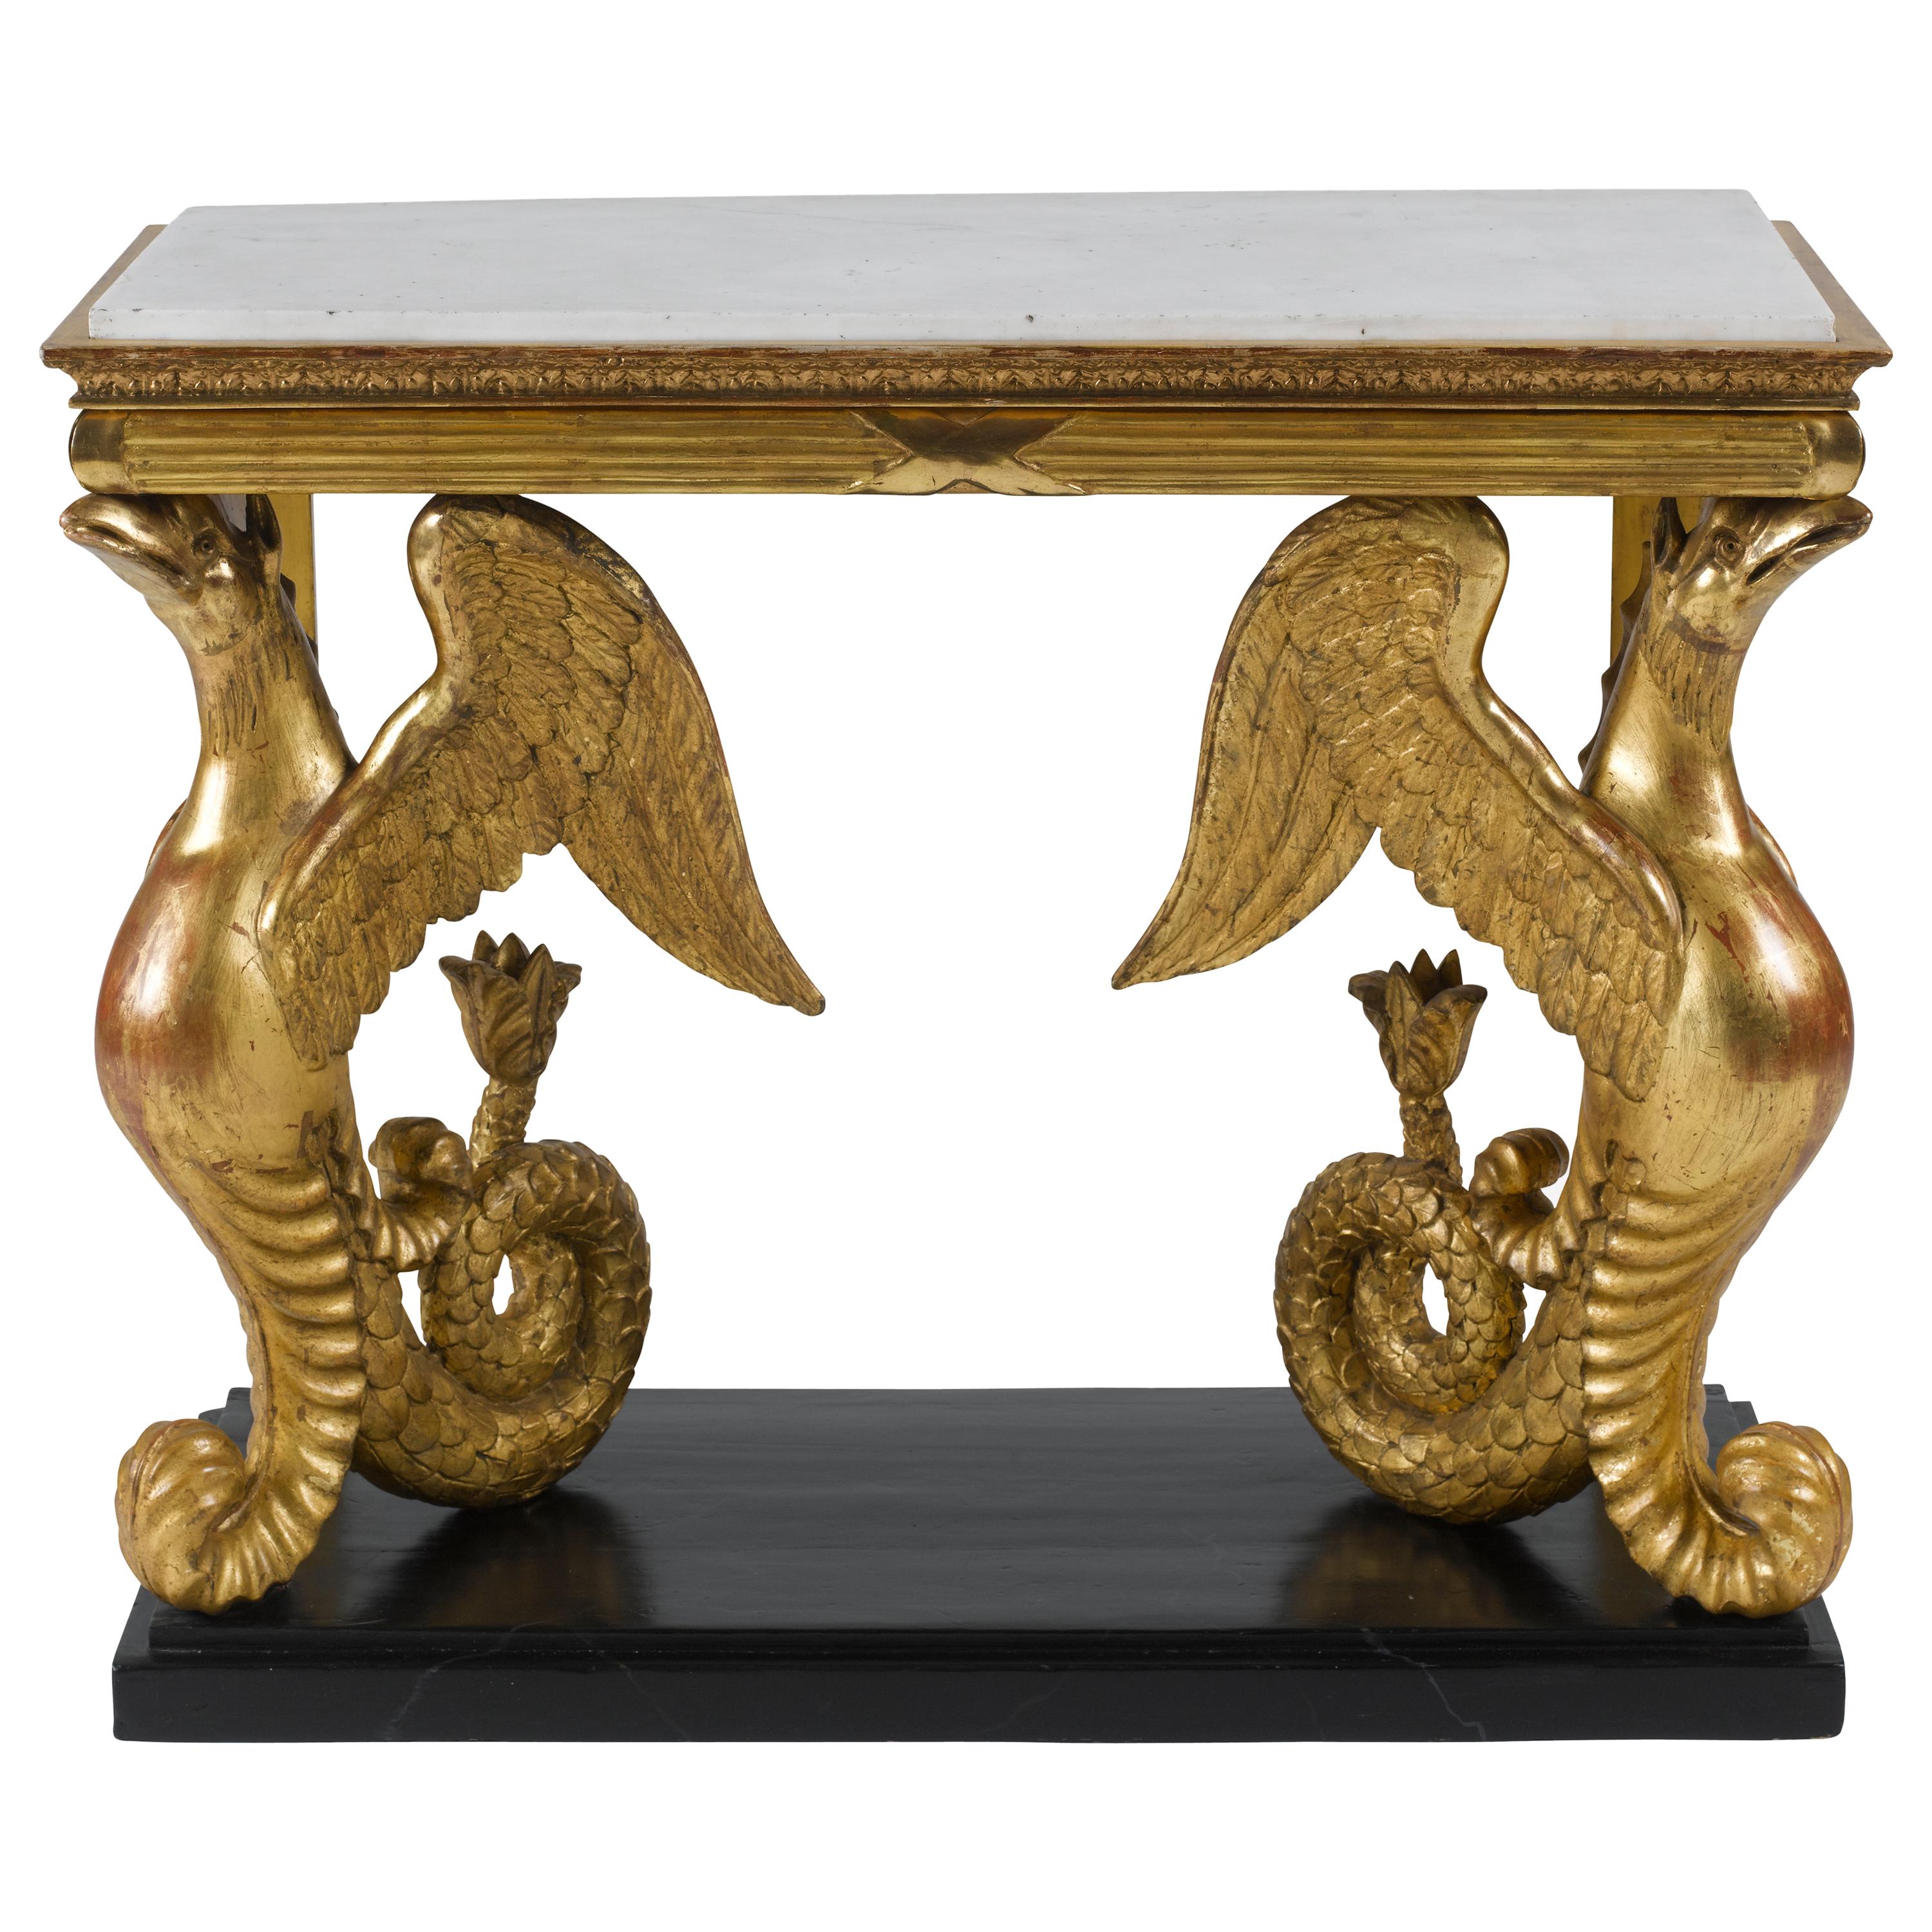 Unusual Early 19th Century Swedish Carved Giltwood Console Table